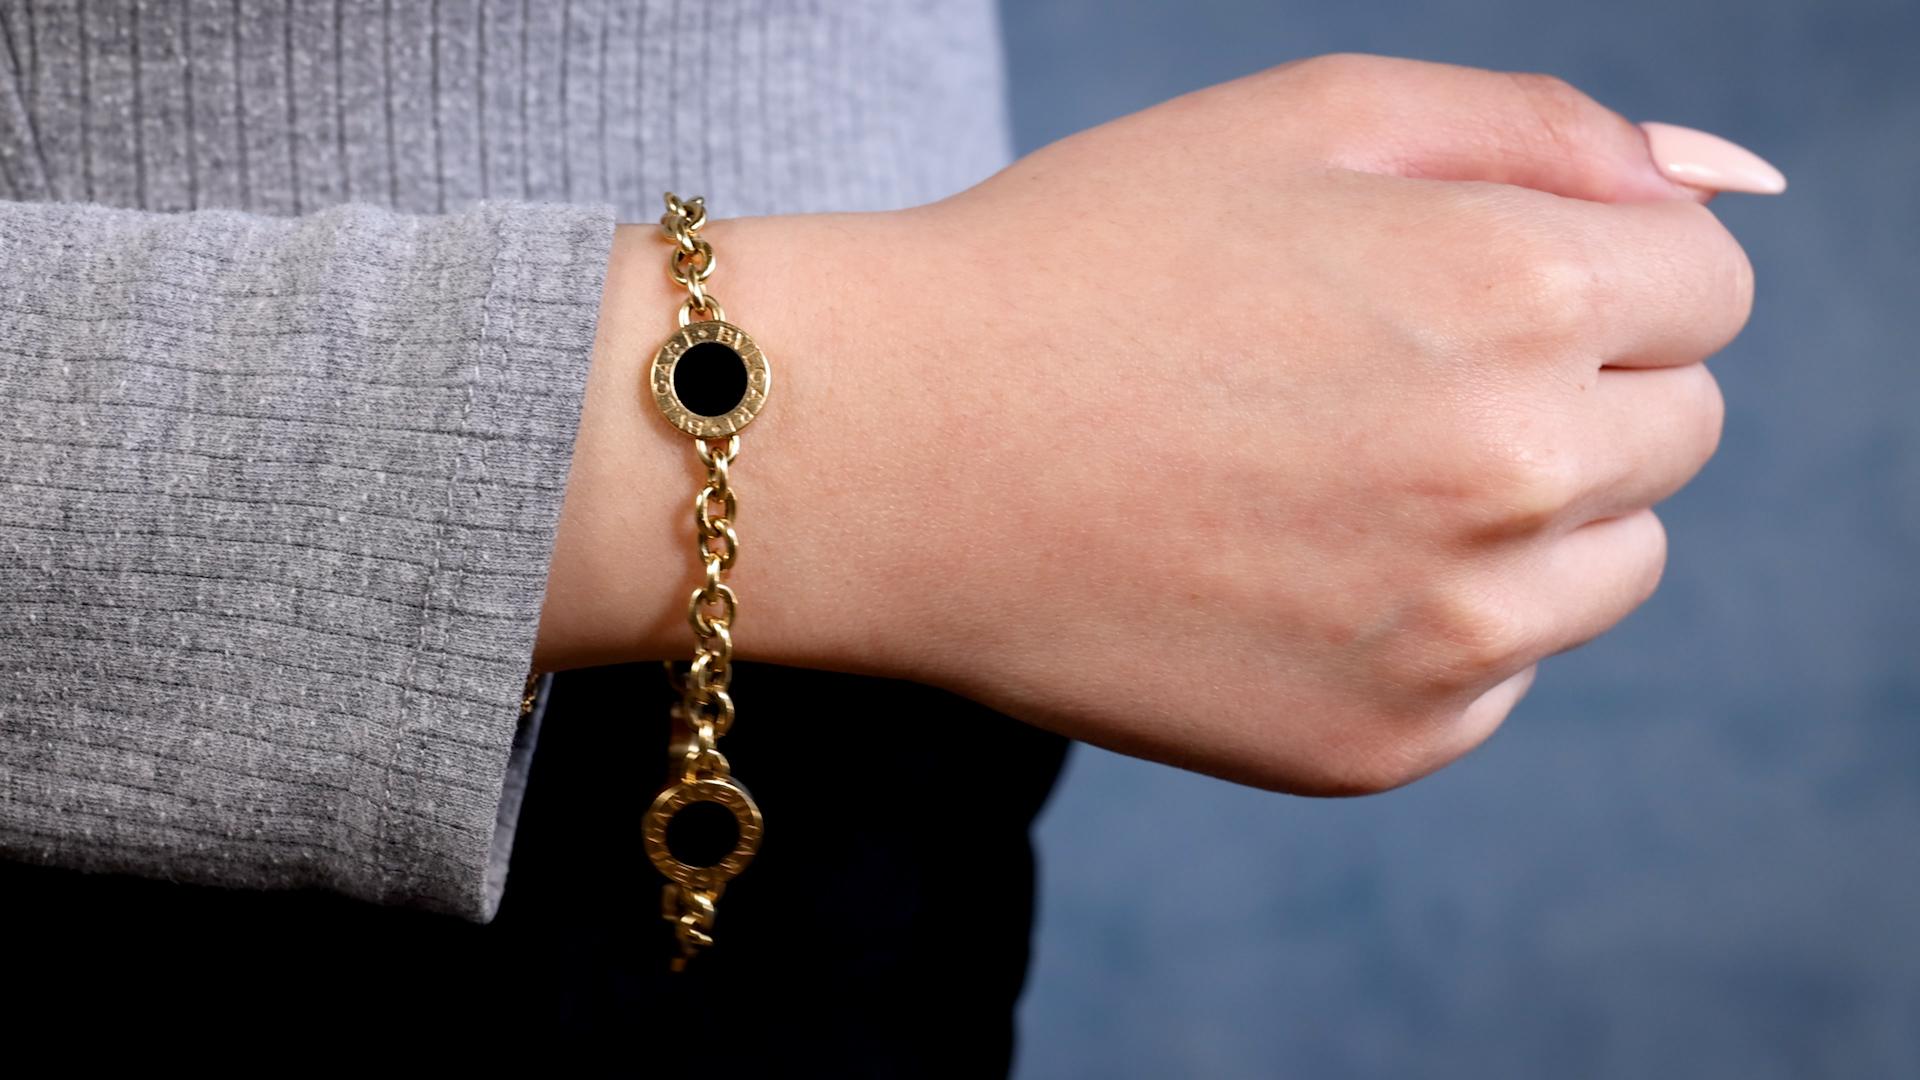 One Vintage Bvlgari Italy Onyx 18k Yellow Gold Bracelet. Featuring polished black onyx. Crafted in 18 karat yellow gold with purity mark and Italian Bvlgari maker's mark. Circa 2000. The bracelet is 8 inches in length.   

About this Item: Indulge